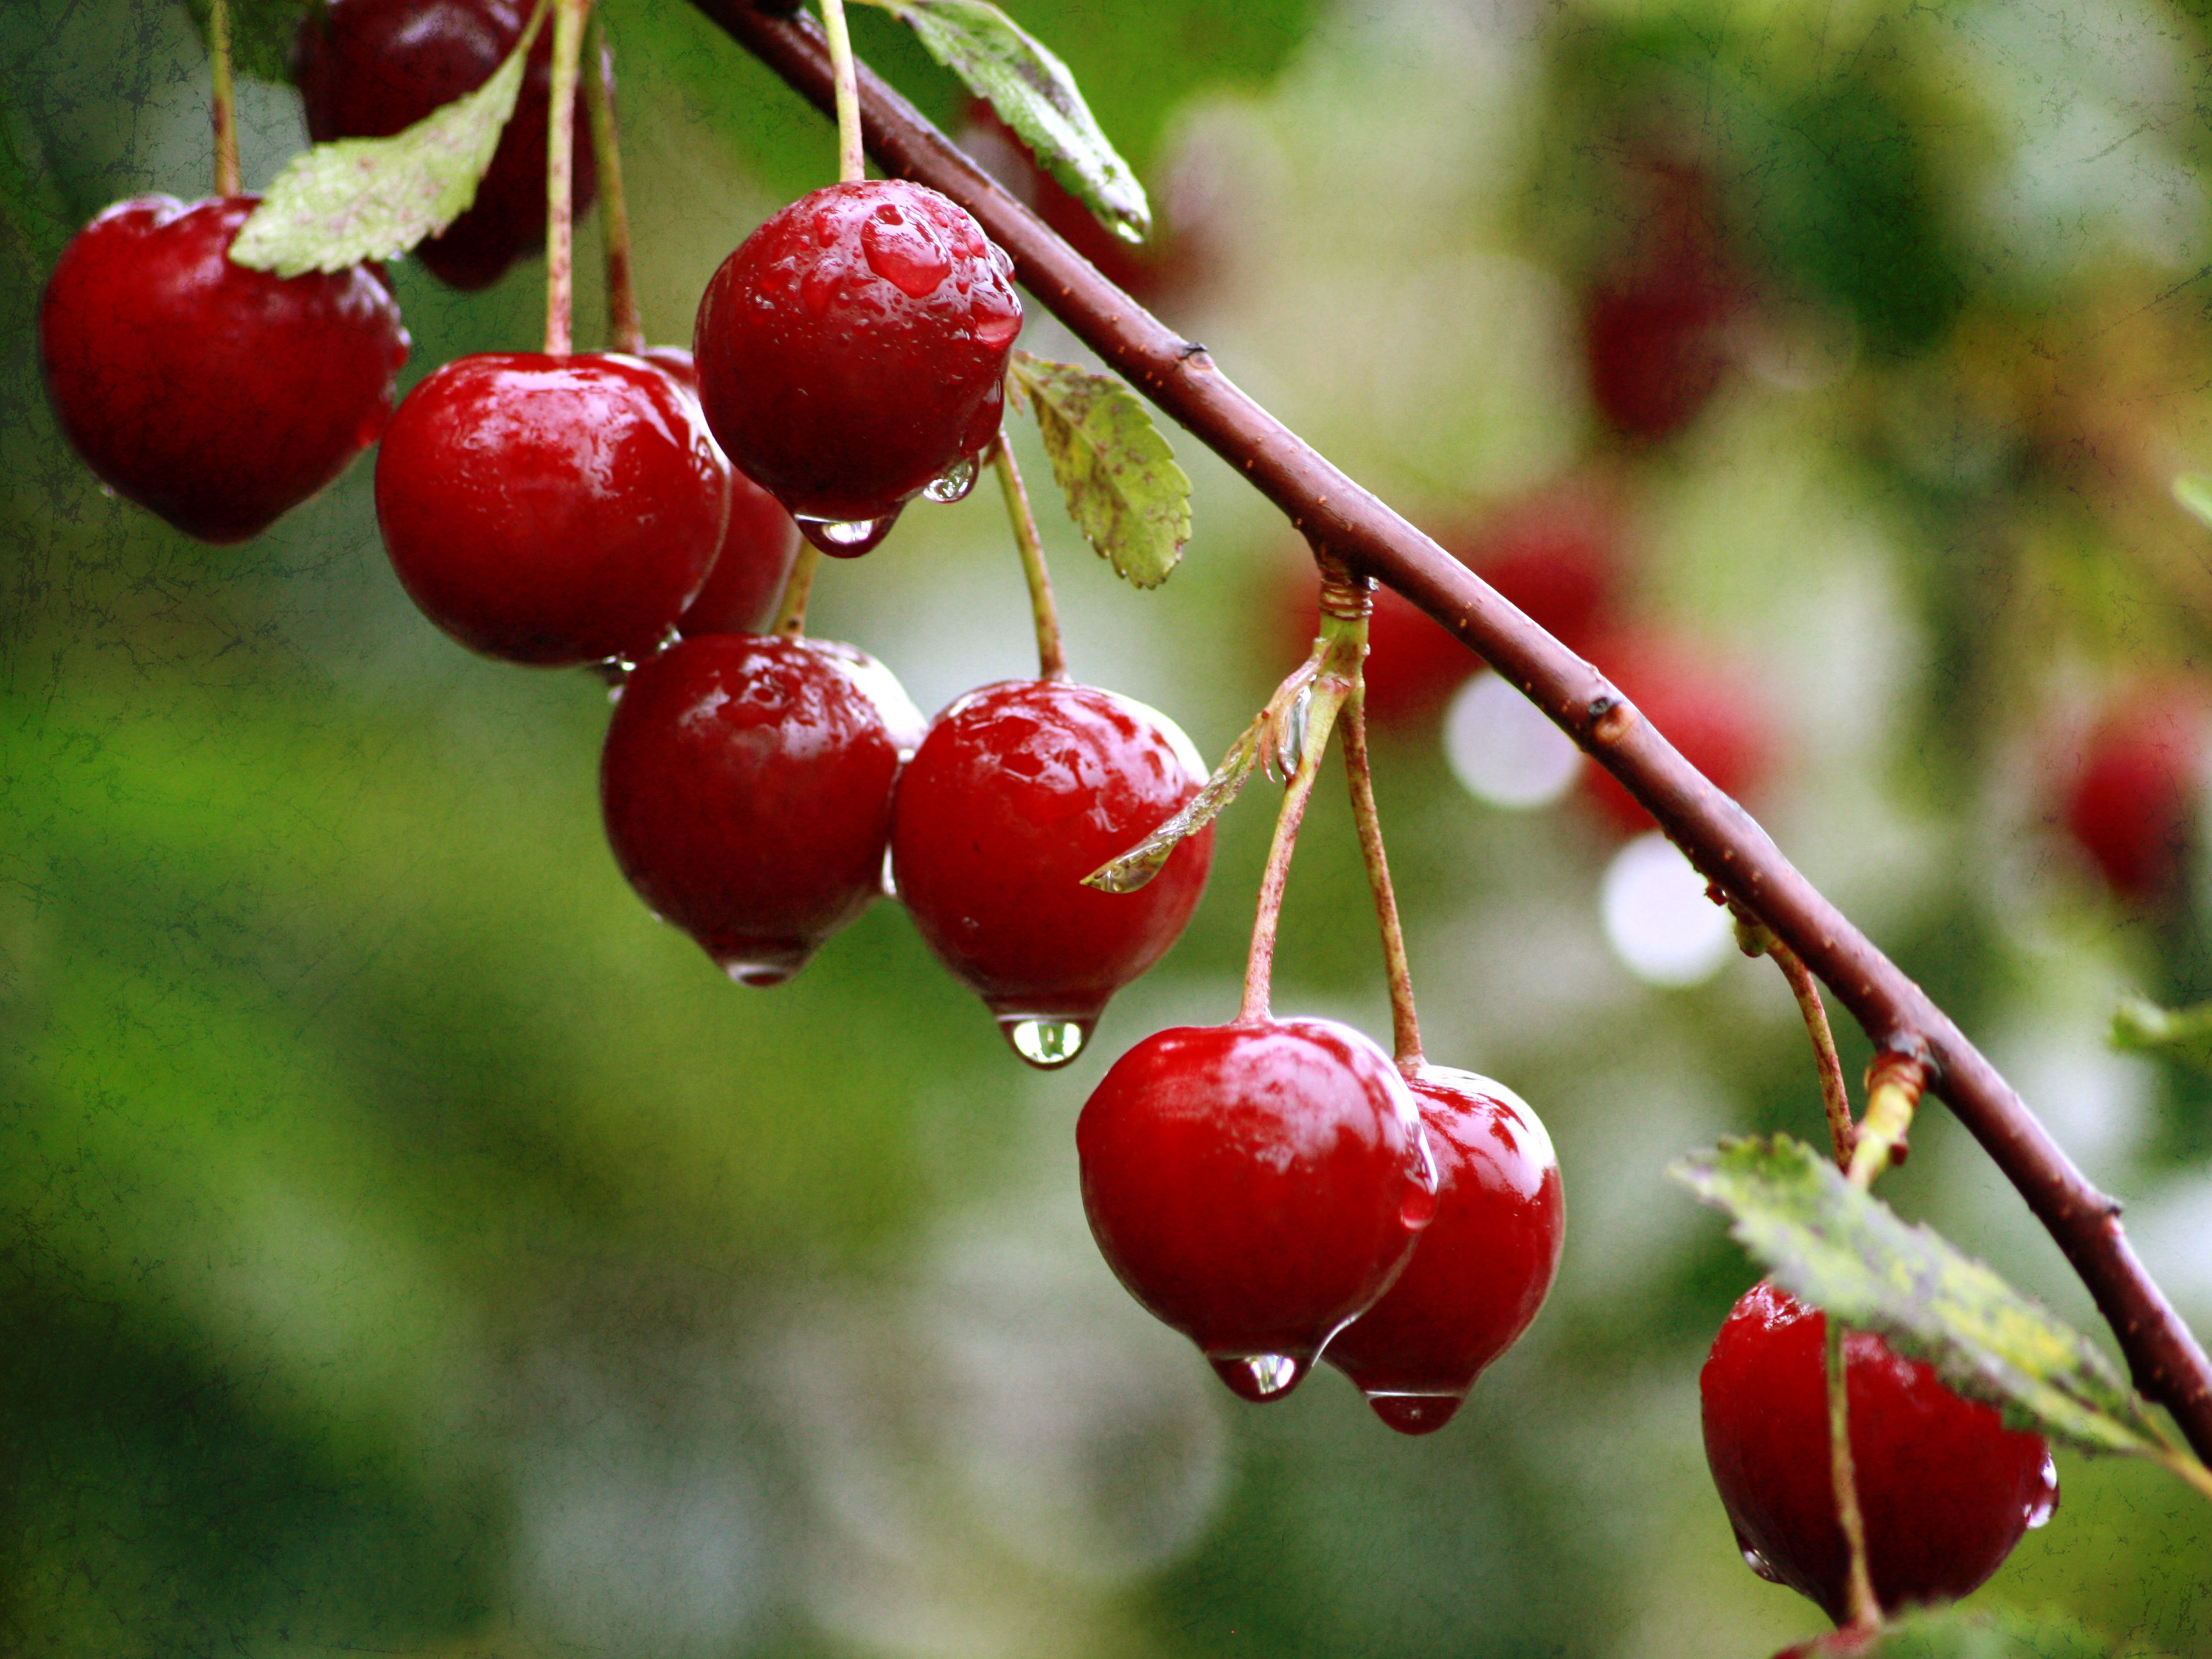 Cherry wet from a summer rain wallpaper and image